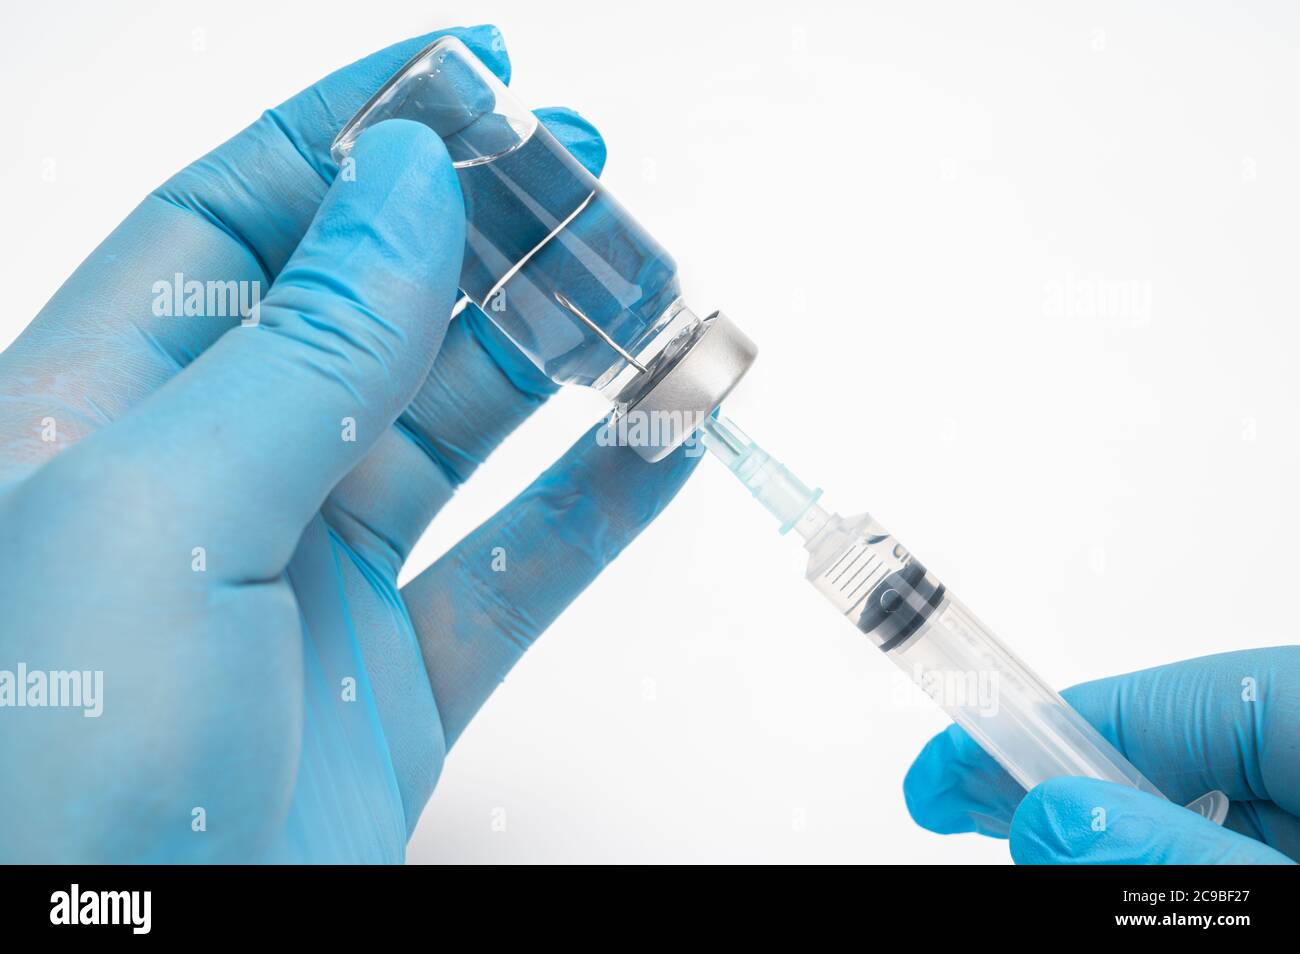 Scientist's hand wearing blue gloves and holding an ampoule and syringe. Stock Photo